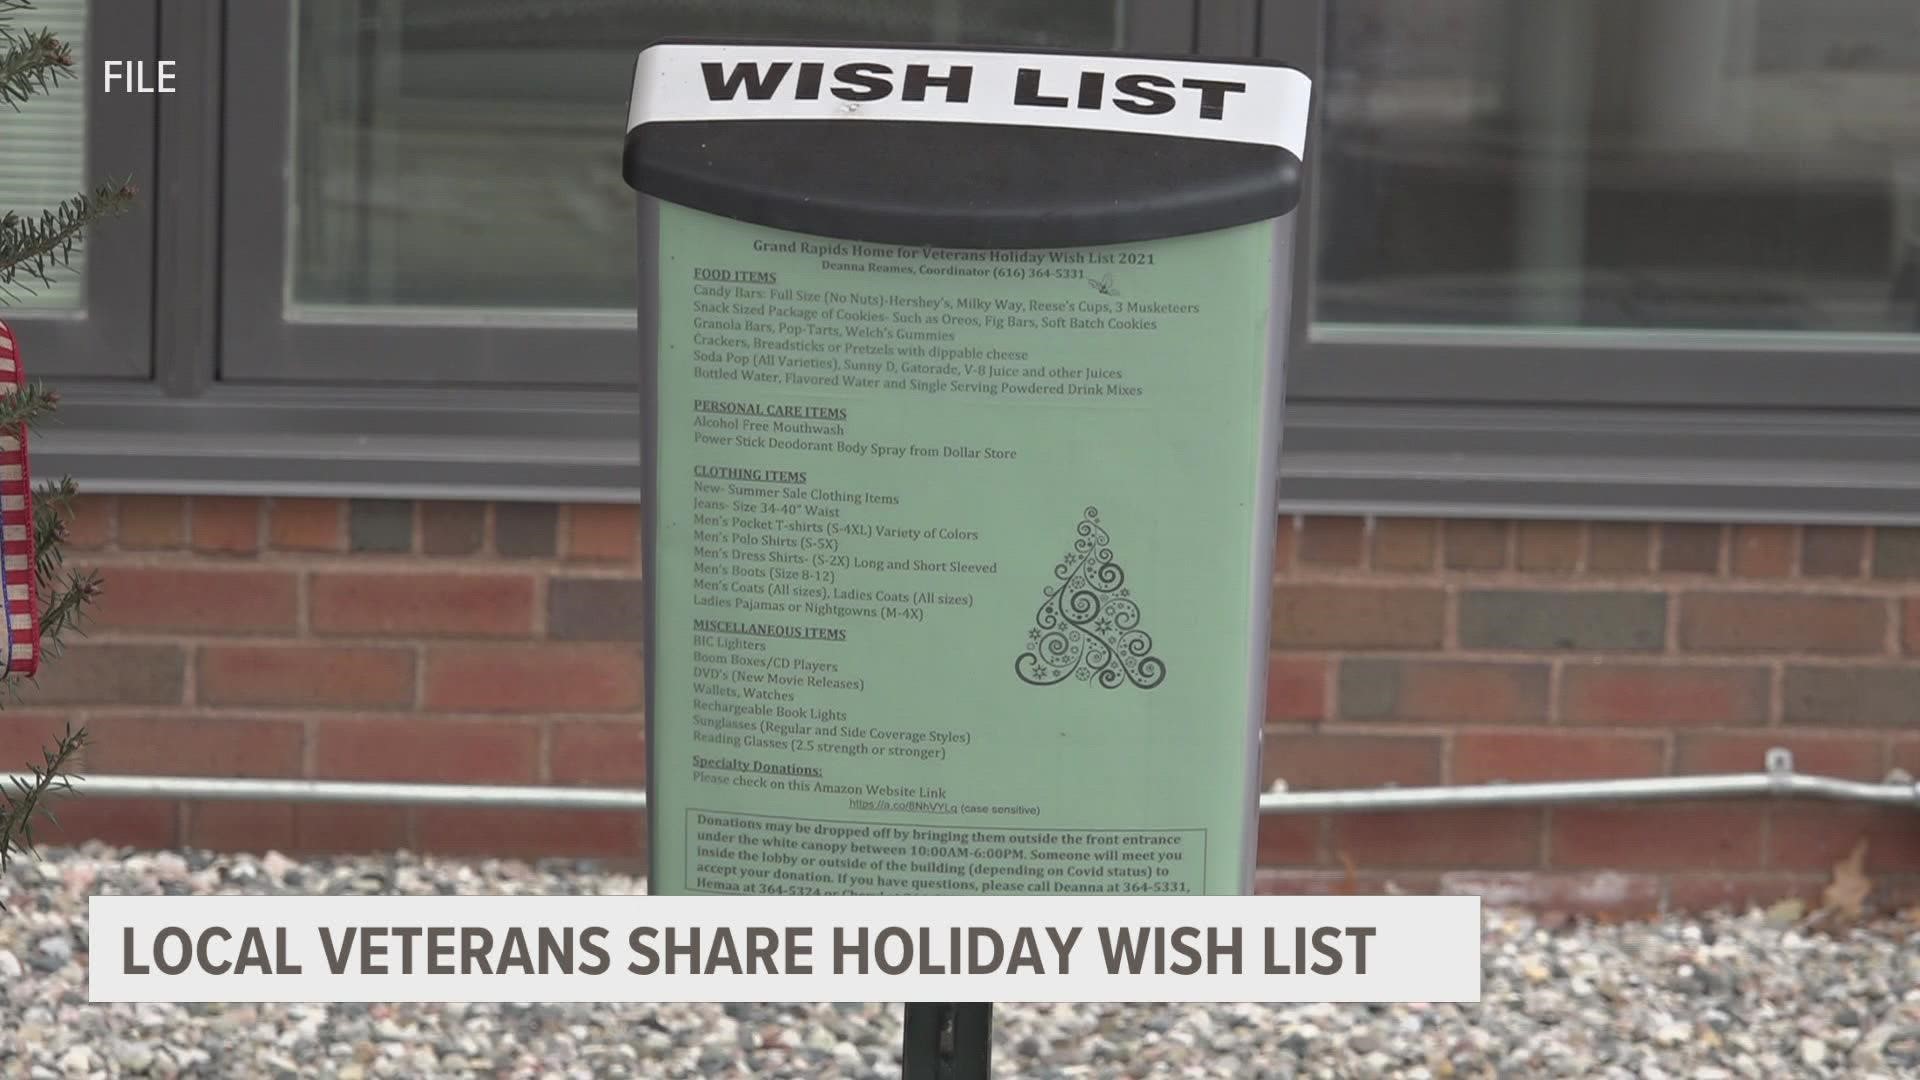 The organization has created a wish list program to support local veterans with gifts like electric razors and media players for veterans in need.